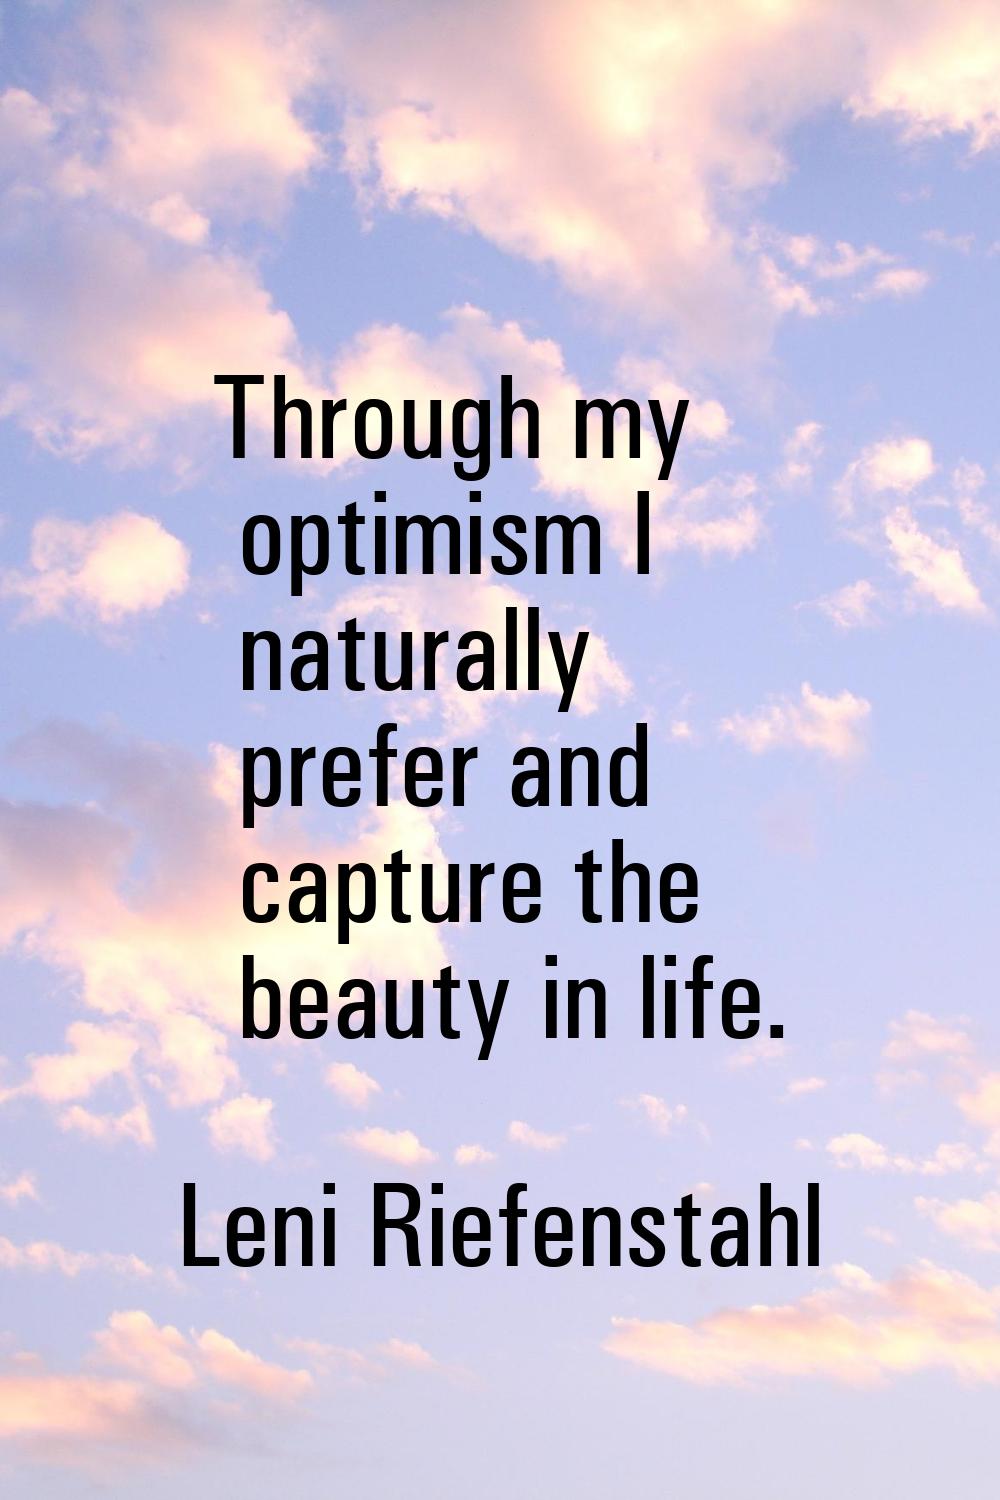 Through my optimism I naturally prefer and capture the beauty in life.